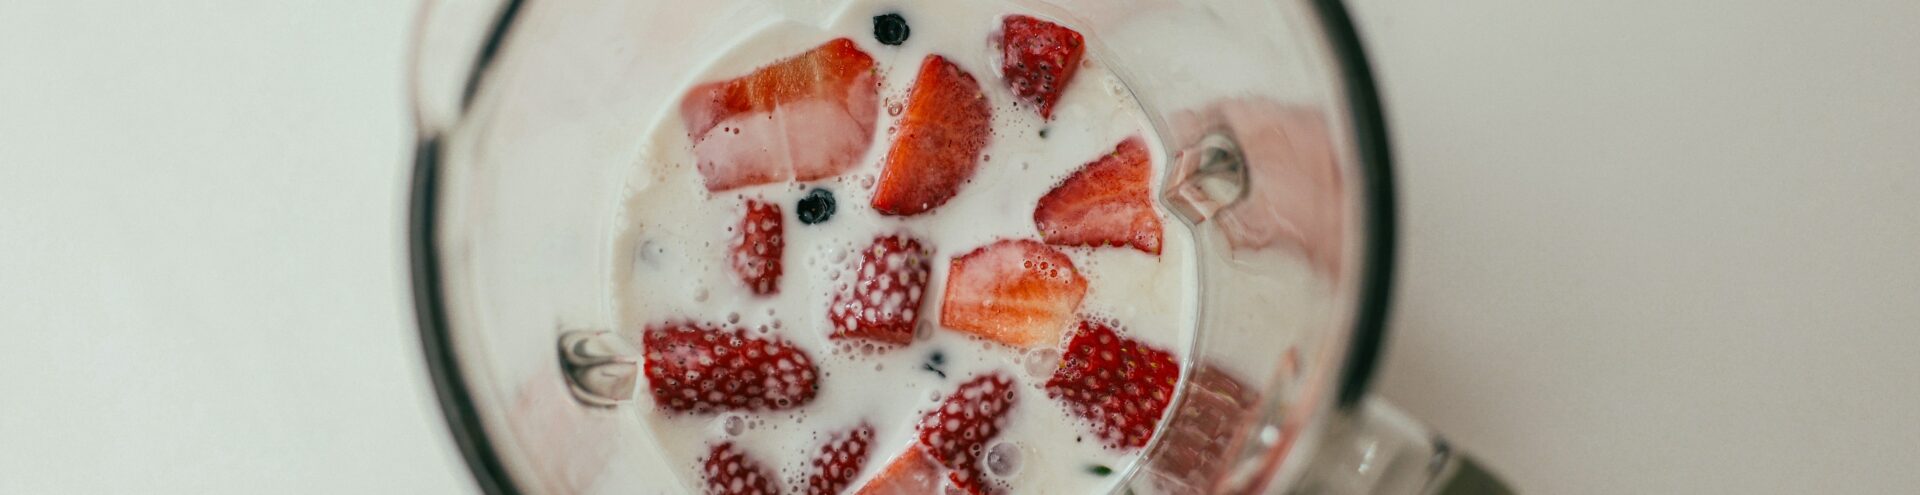 mug with strawberries and milk from above